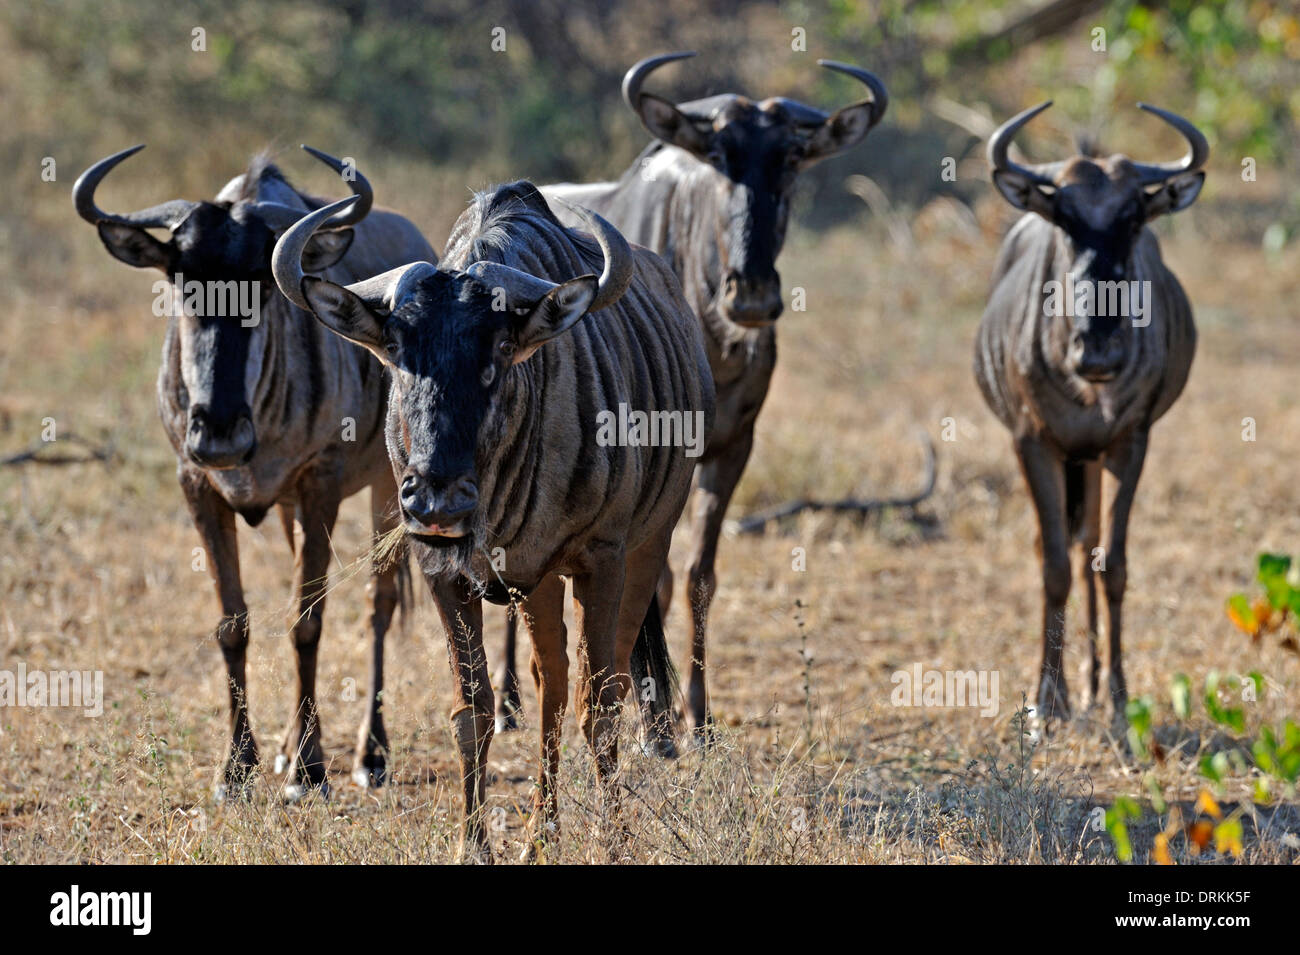 Blue wildebeest or Blouwildebees (Connochaetes taurinus) in Kruger National Park, South Africa Stock Photo